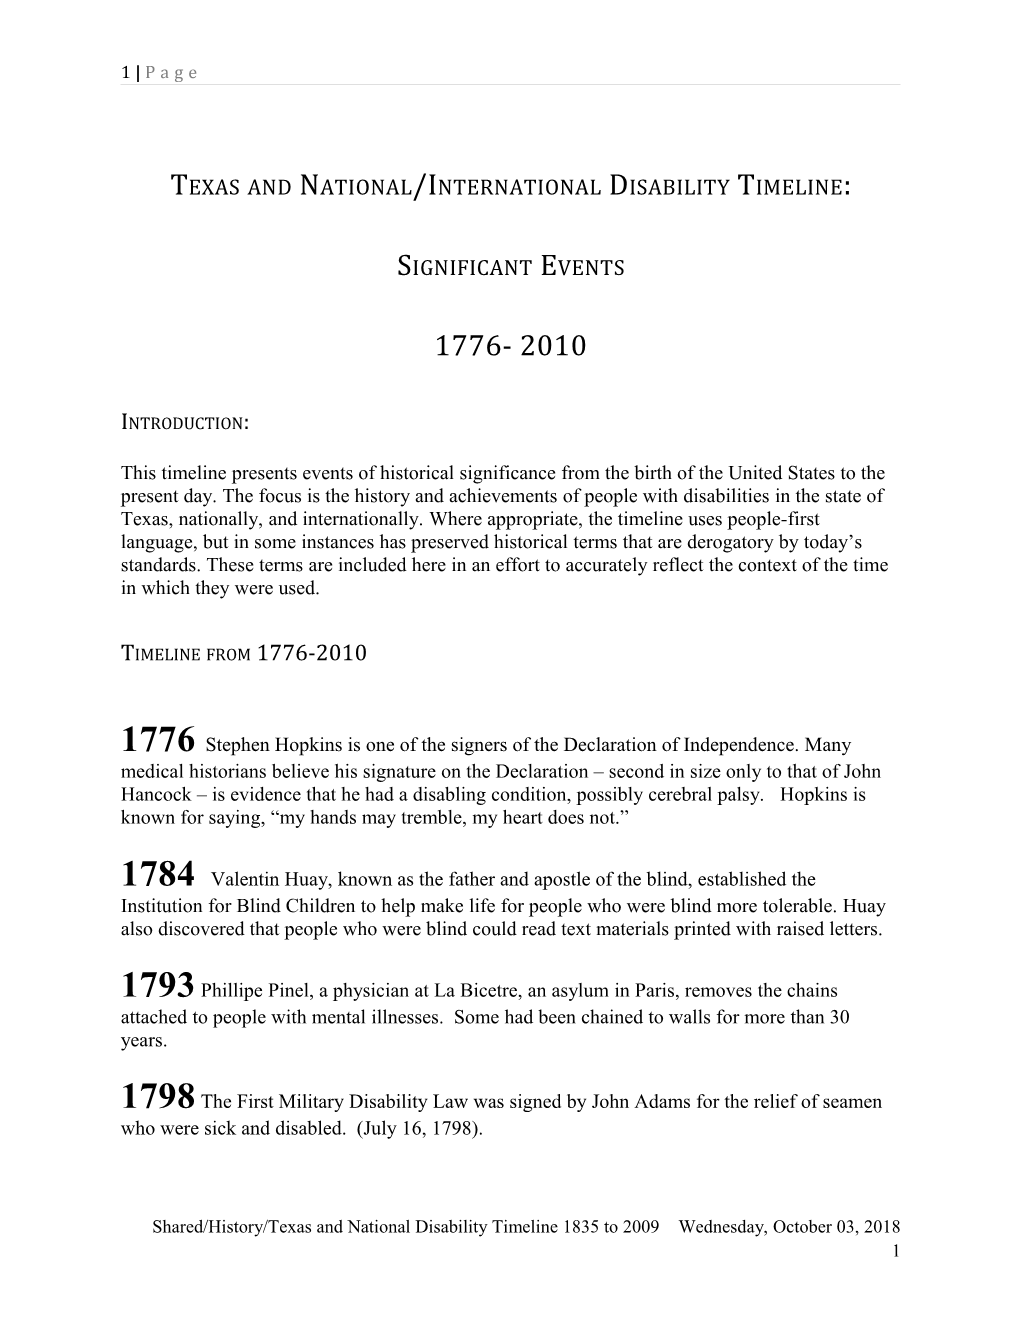 Texas and National/International Disability Timeline